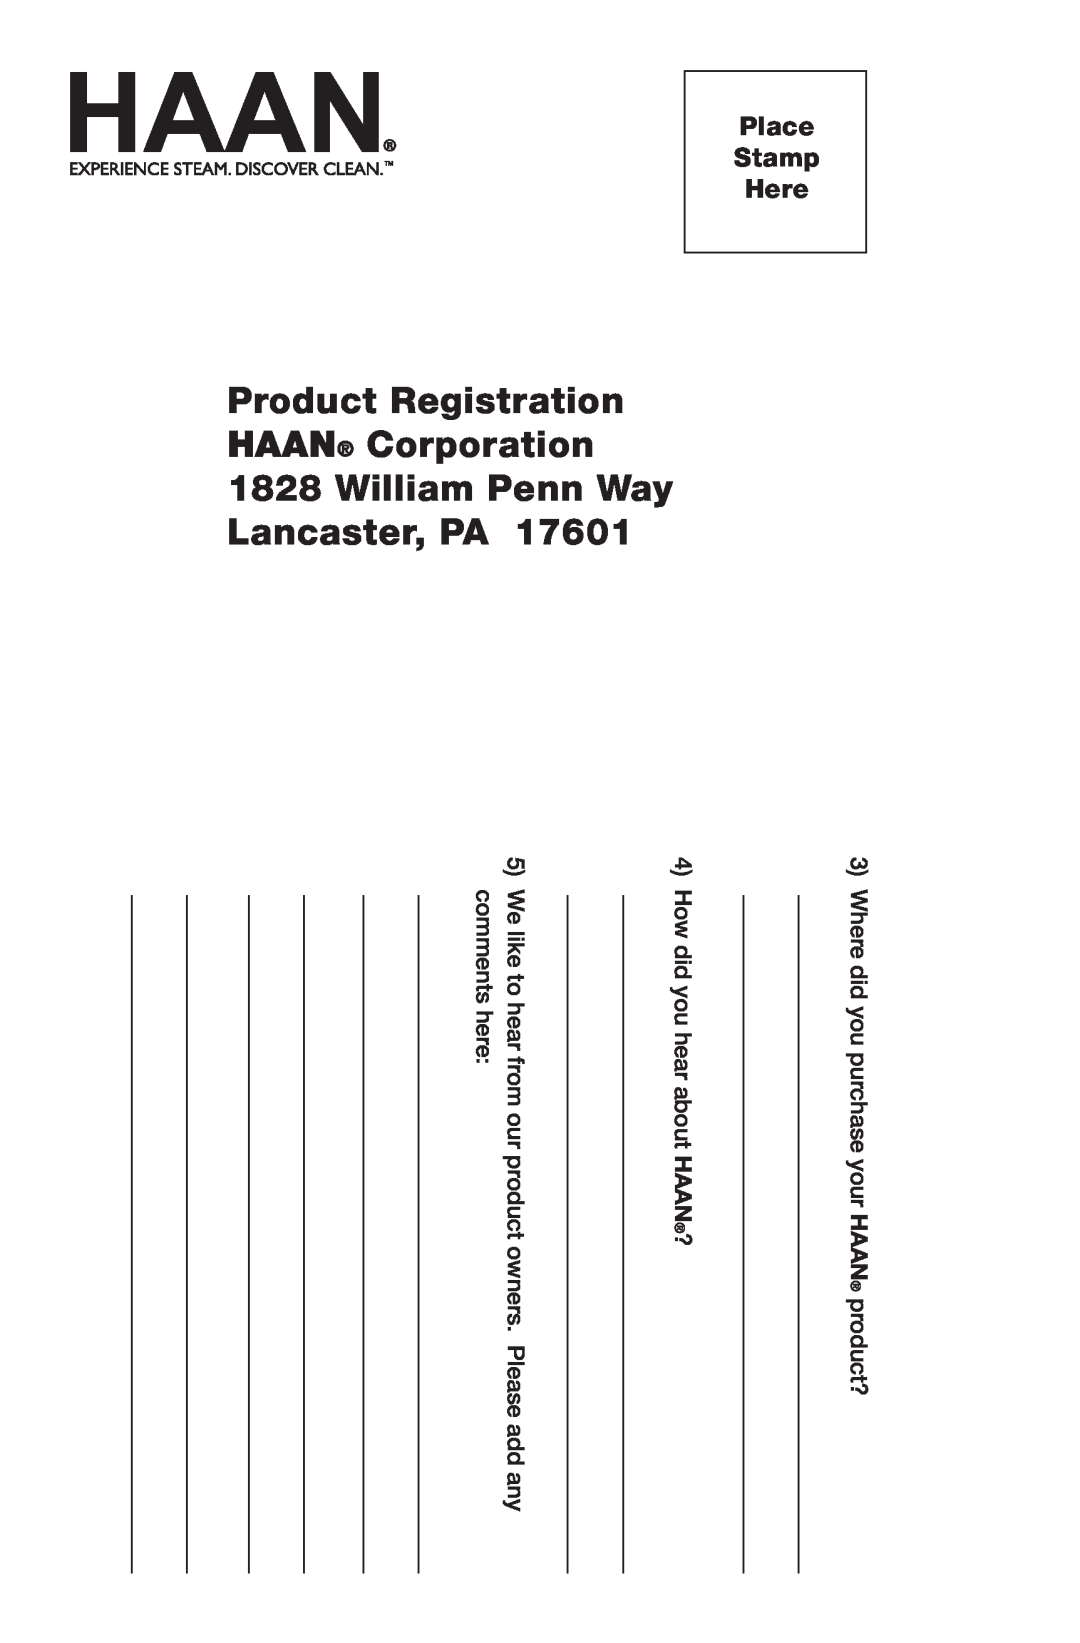 Haan SI-75 instruction manual Product Registration HAAN Corporation 1828 William Penn Way, Lancaster, PA, Place Stamp Here 